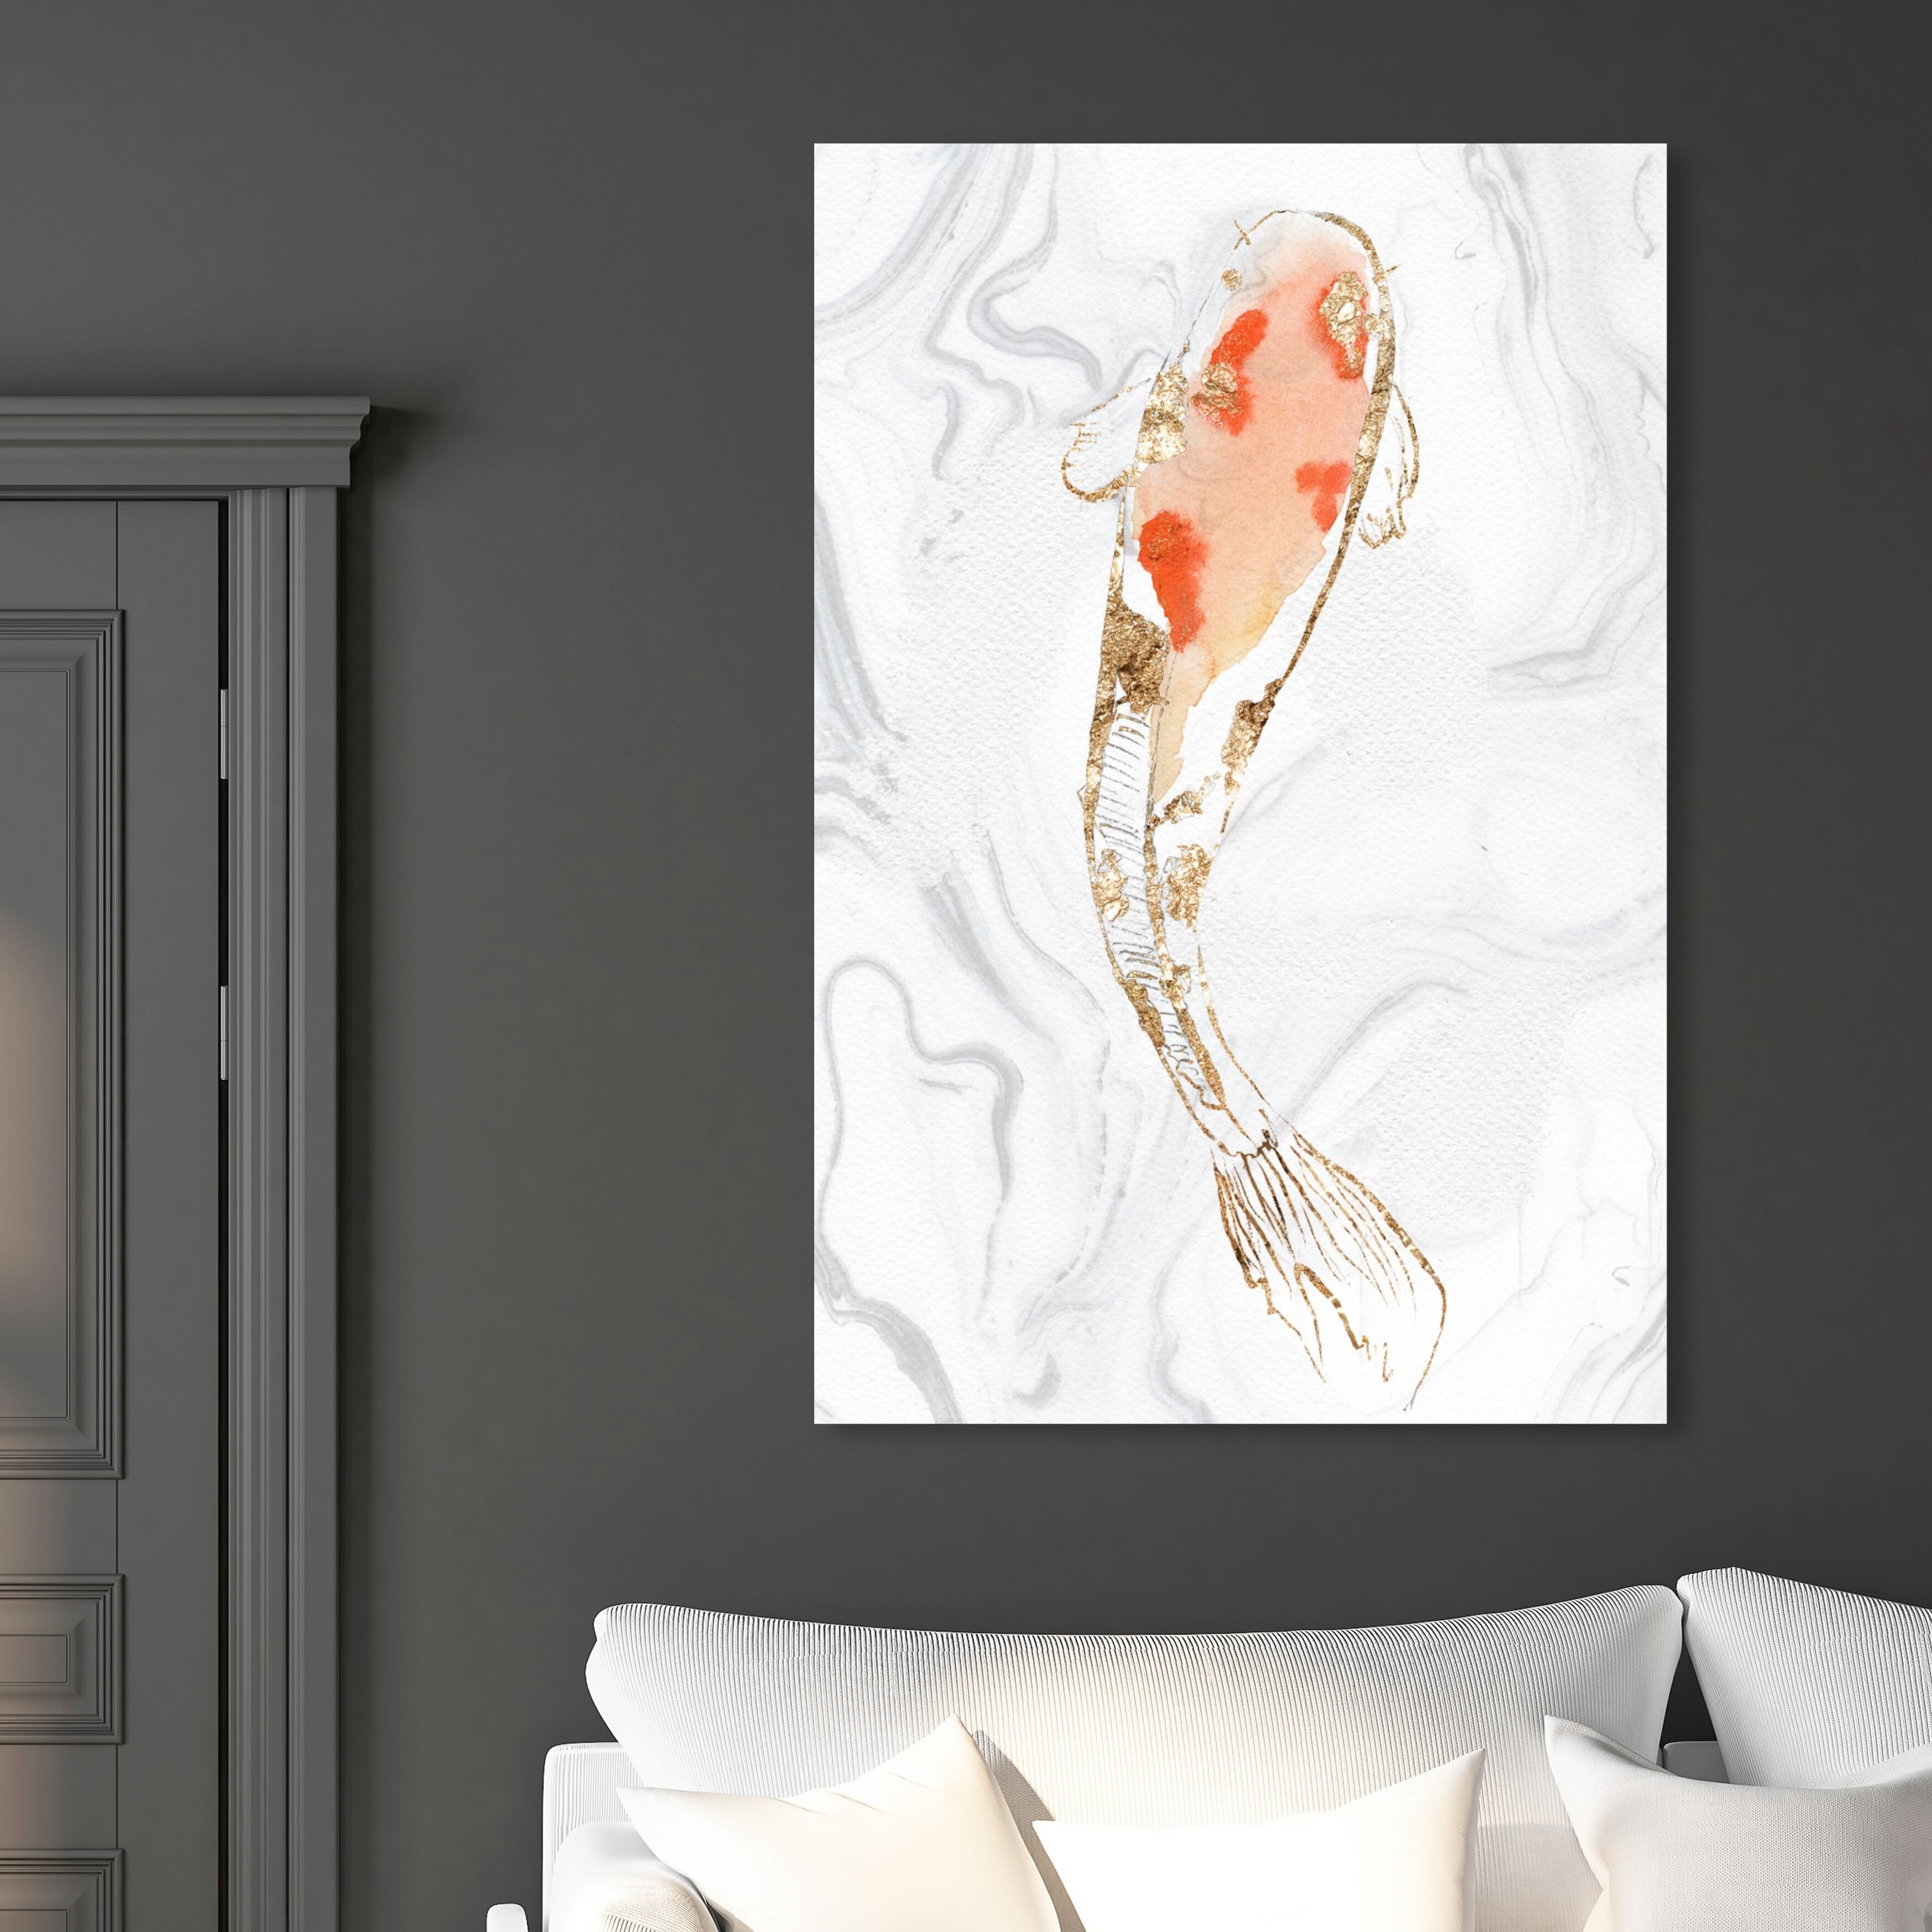 Shop Oliver Gal Left Koi Fish Marble By Julianne Taylor Style Nautical And Coastal Wall Art Canvas Print Orange Gold Overstock 28845188 20 X 30